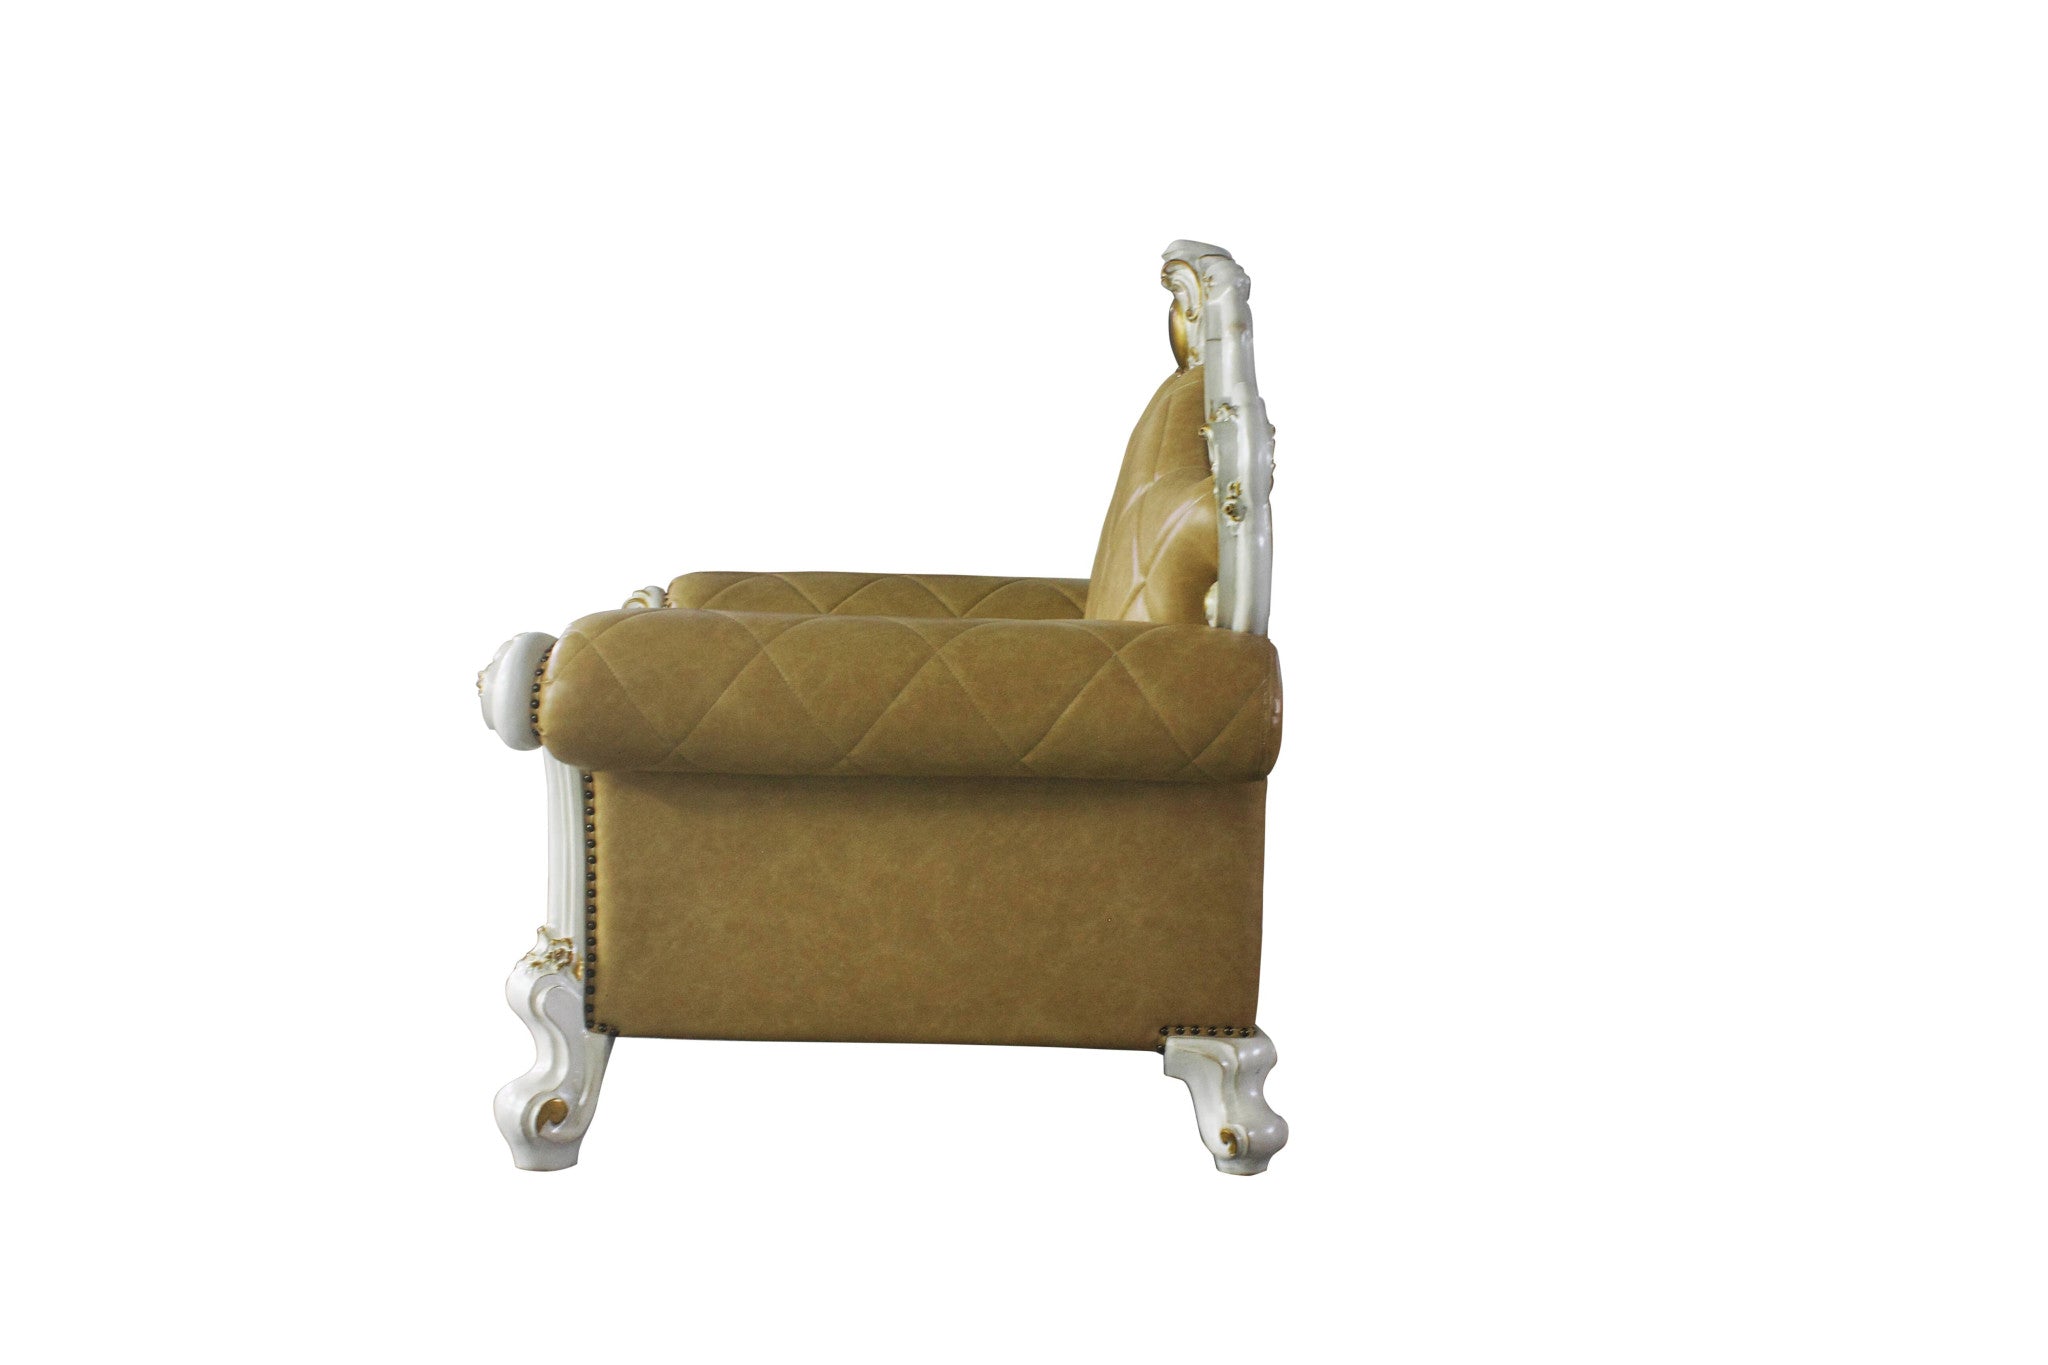 50" Beige and Pearl Faux Leather Tufted Arm Chair